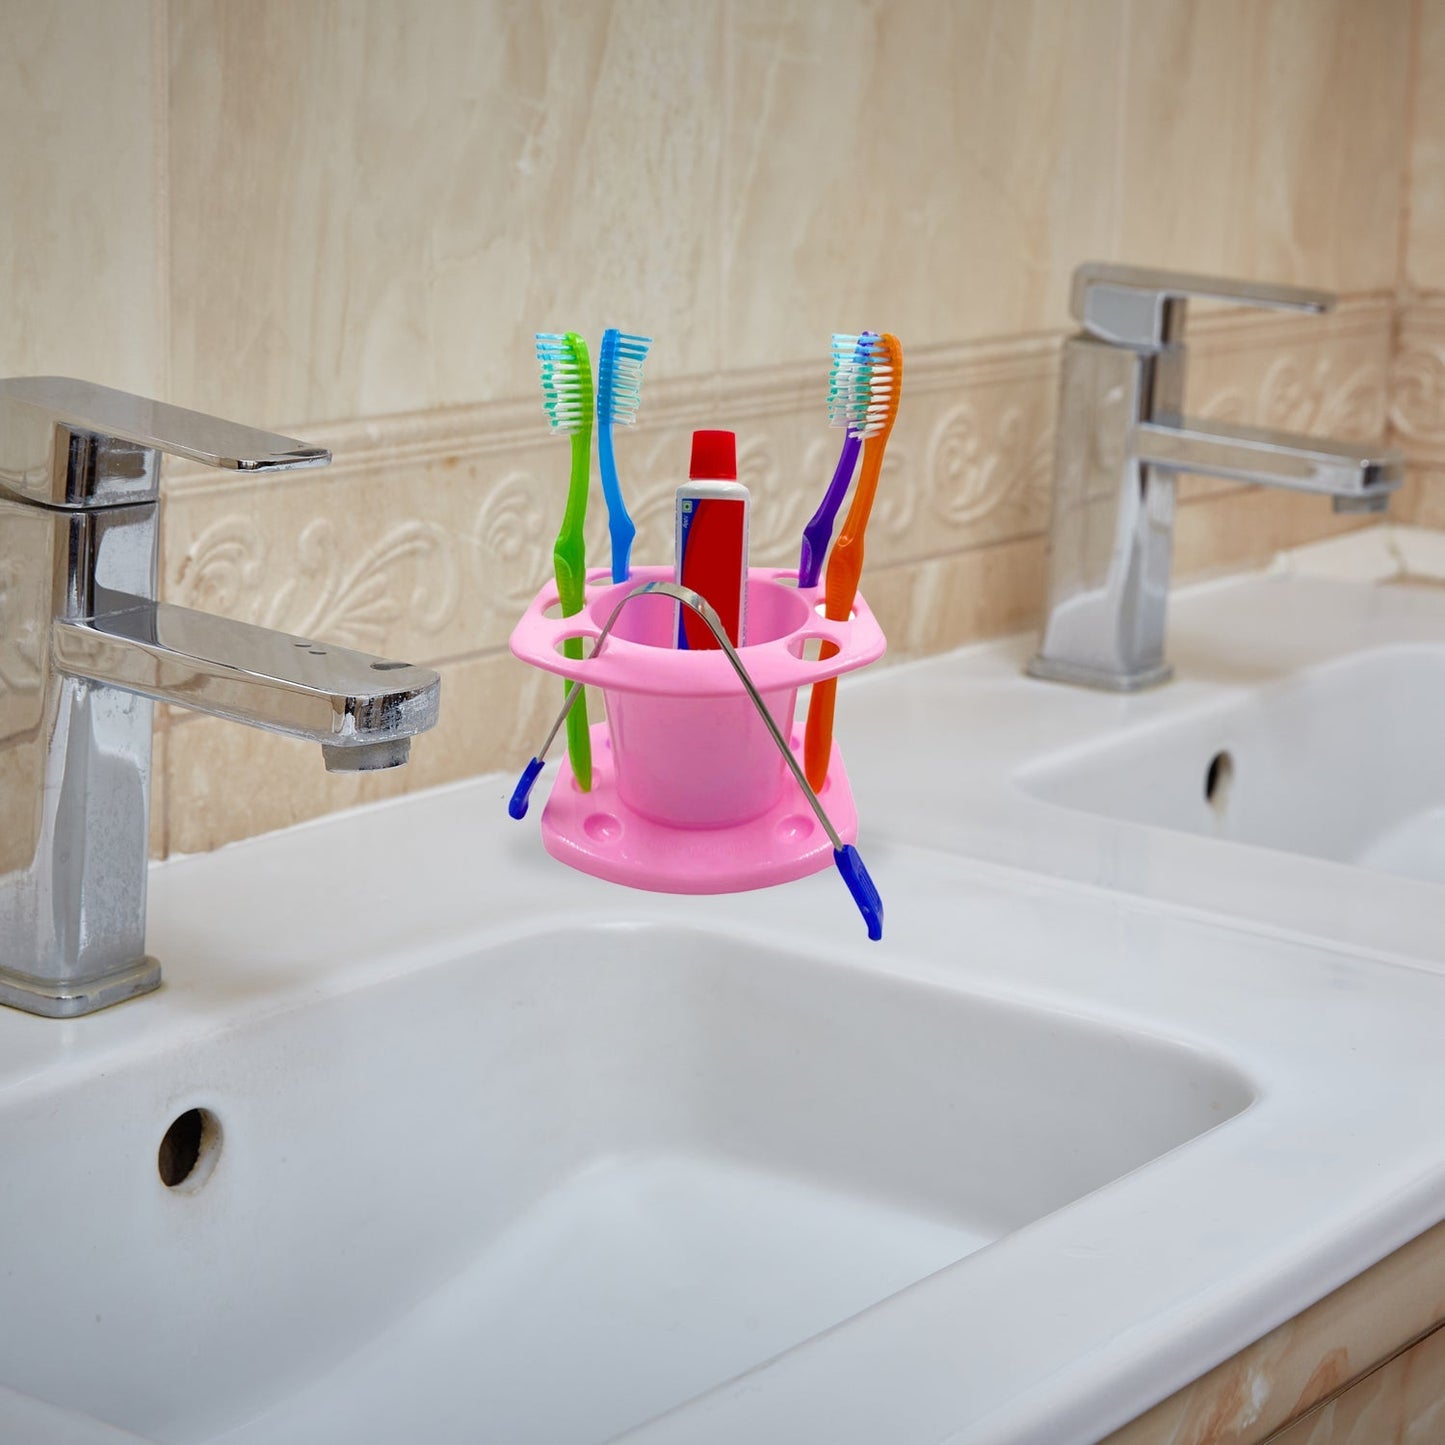 3689 Toothbrush Holder widely used in all types of bathroom places for holding and storing toothbrushes and toothpastes of all types of family members etc. DeoDap